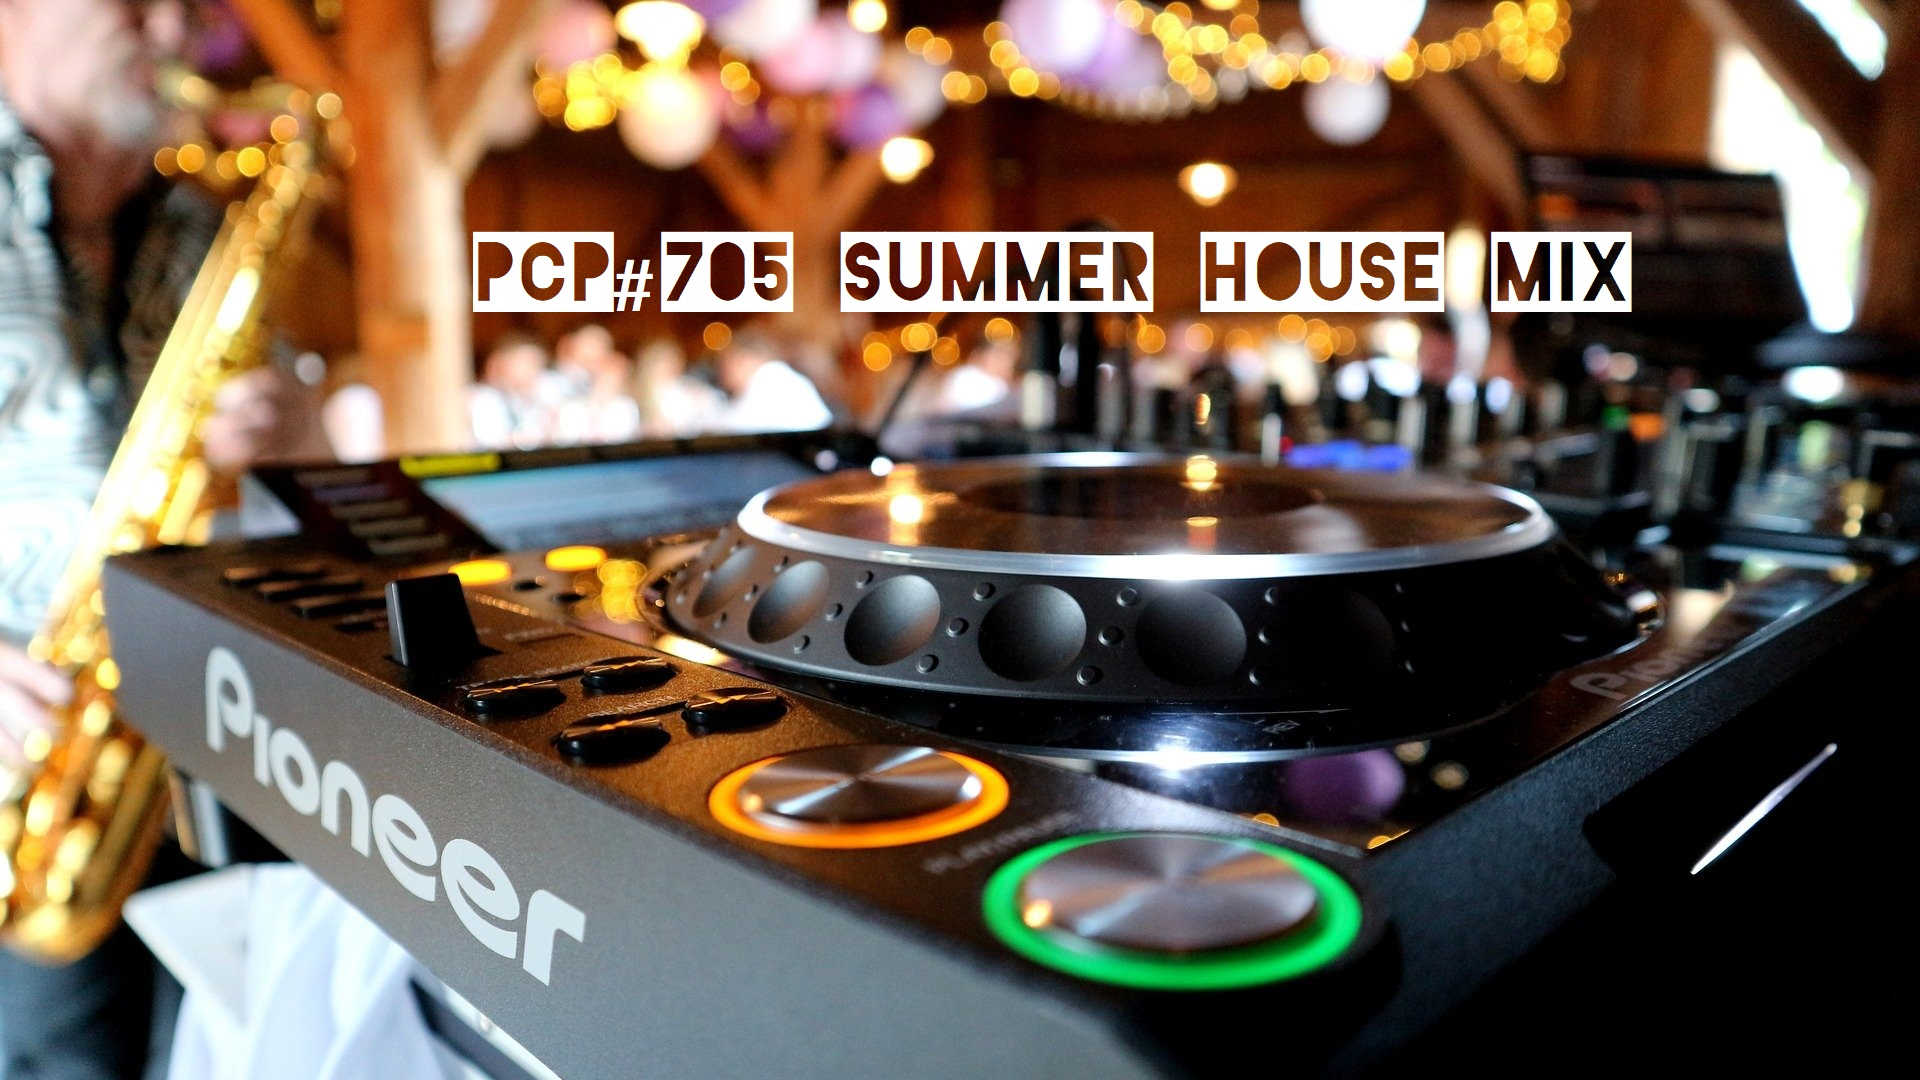 PCP#705... Summer House Mix.....